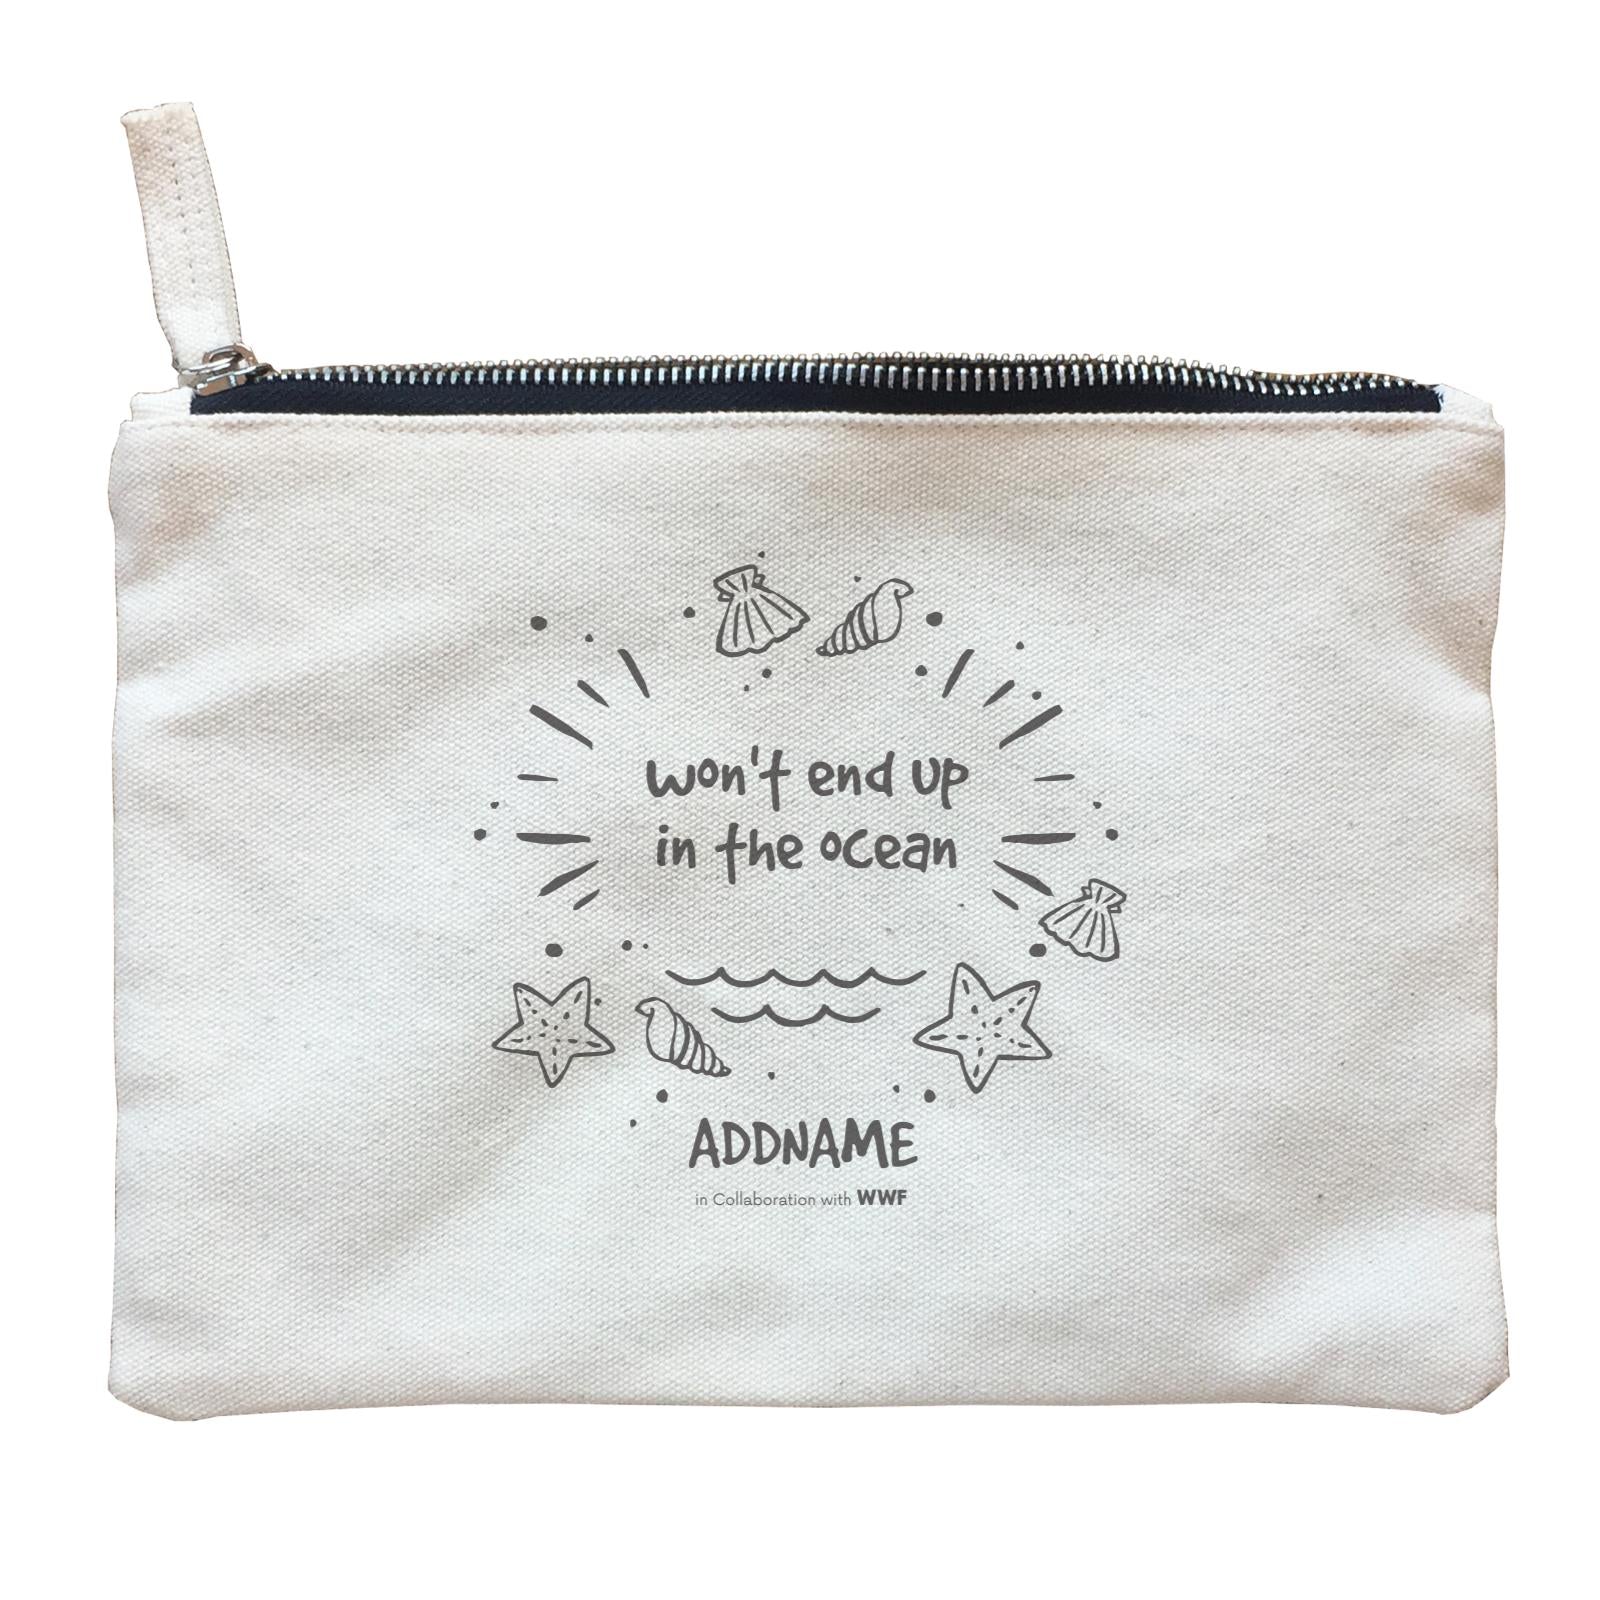 Wont End Up In The Ocean Doodle Addname Zipper Pouch